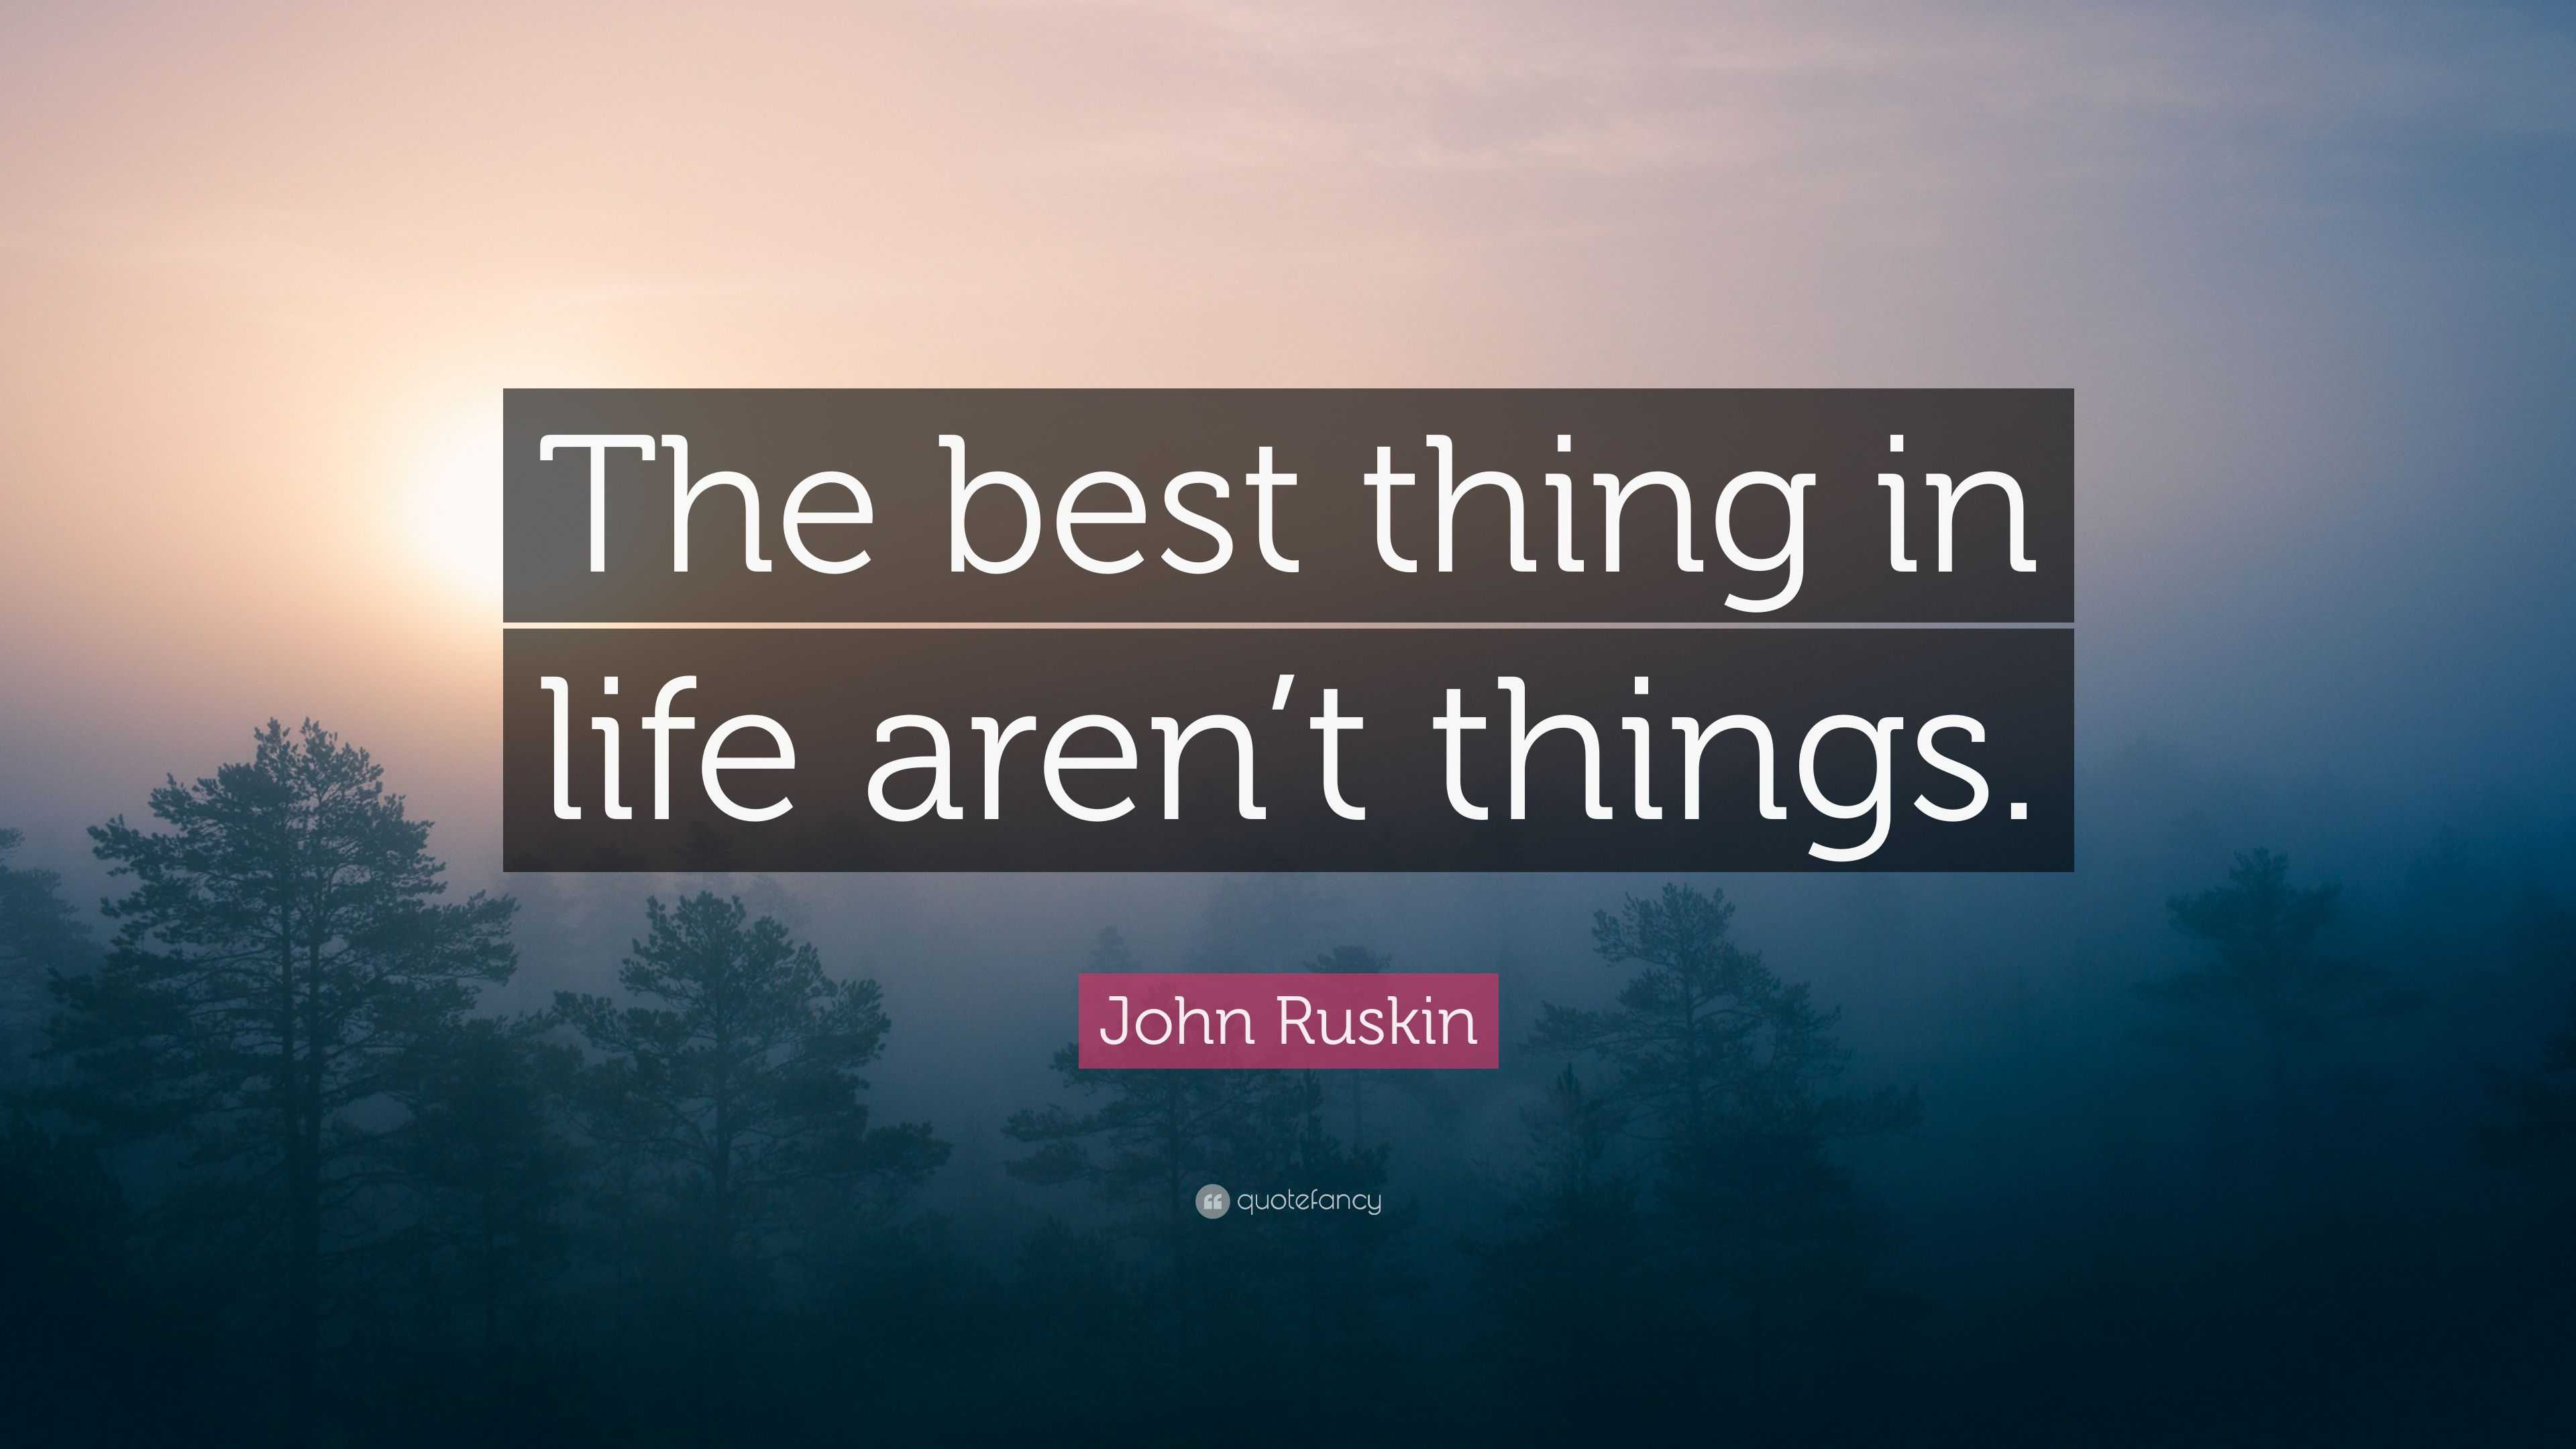 John Ruskin Quote: “The best thing in life aren’t things.” (12